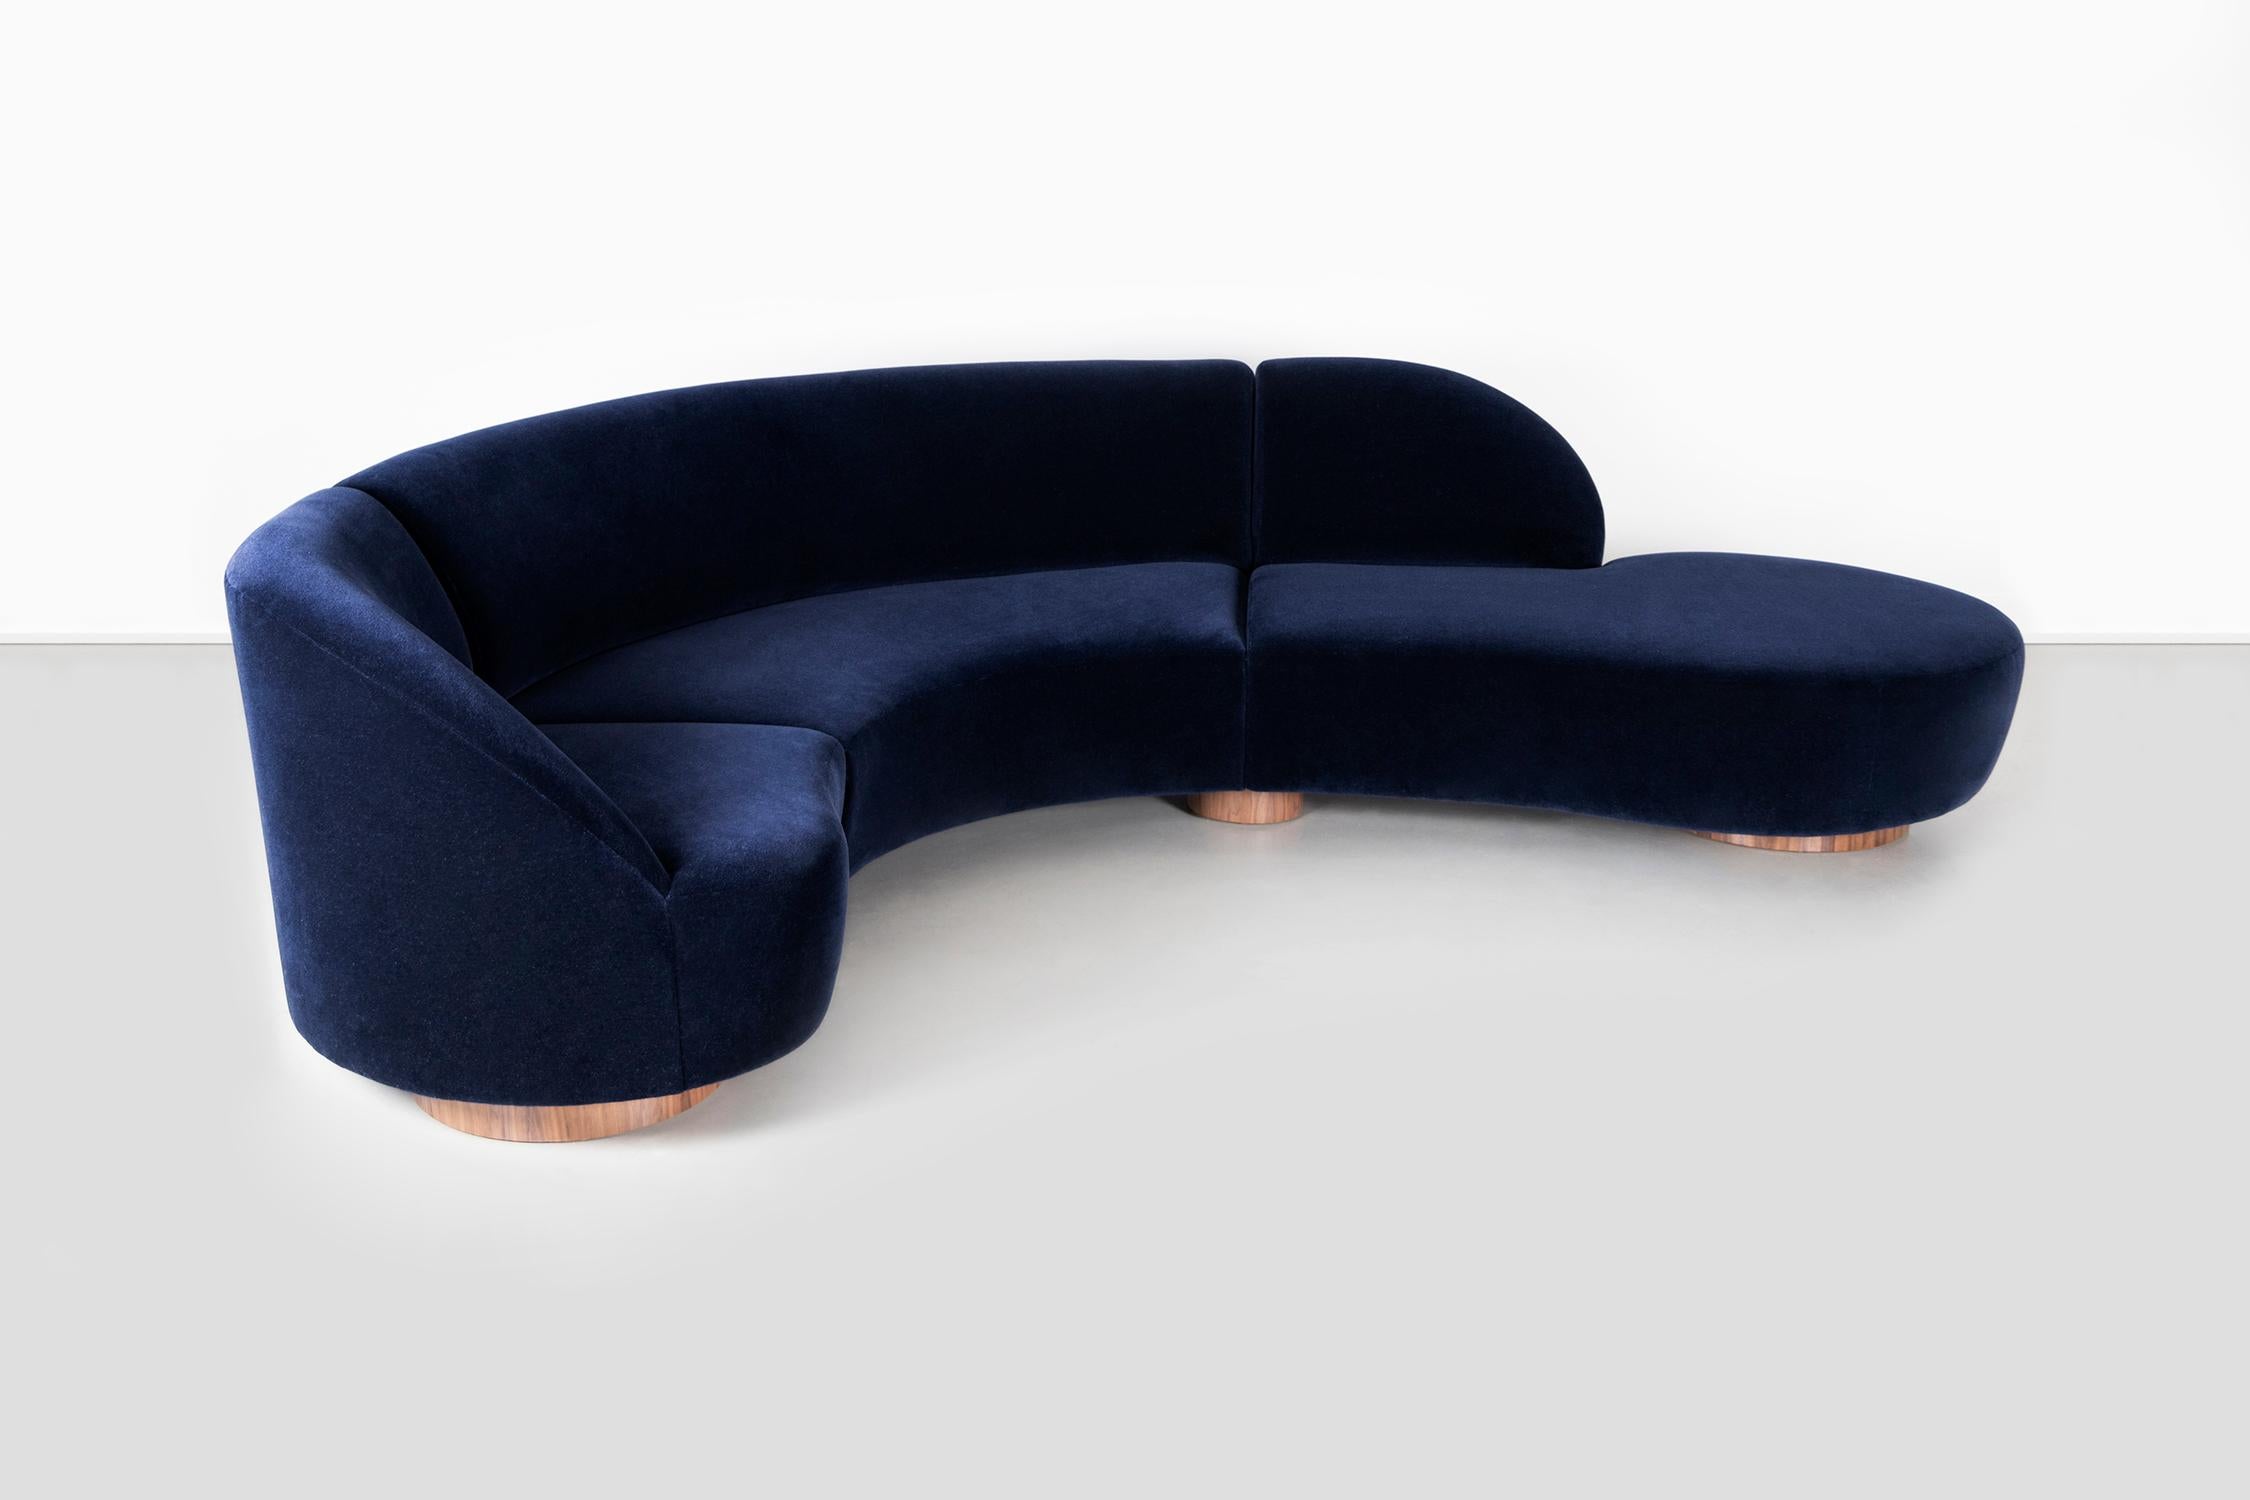 Late 20th Century Vladimir Kagan for Directional Cloud Sectional Sofa Reupholstered in Mohair